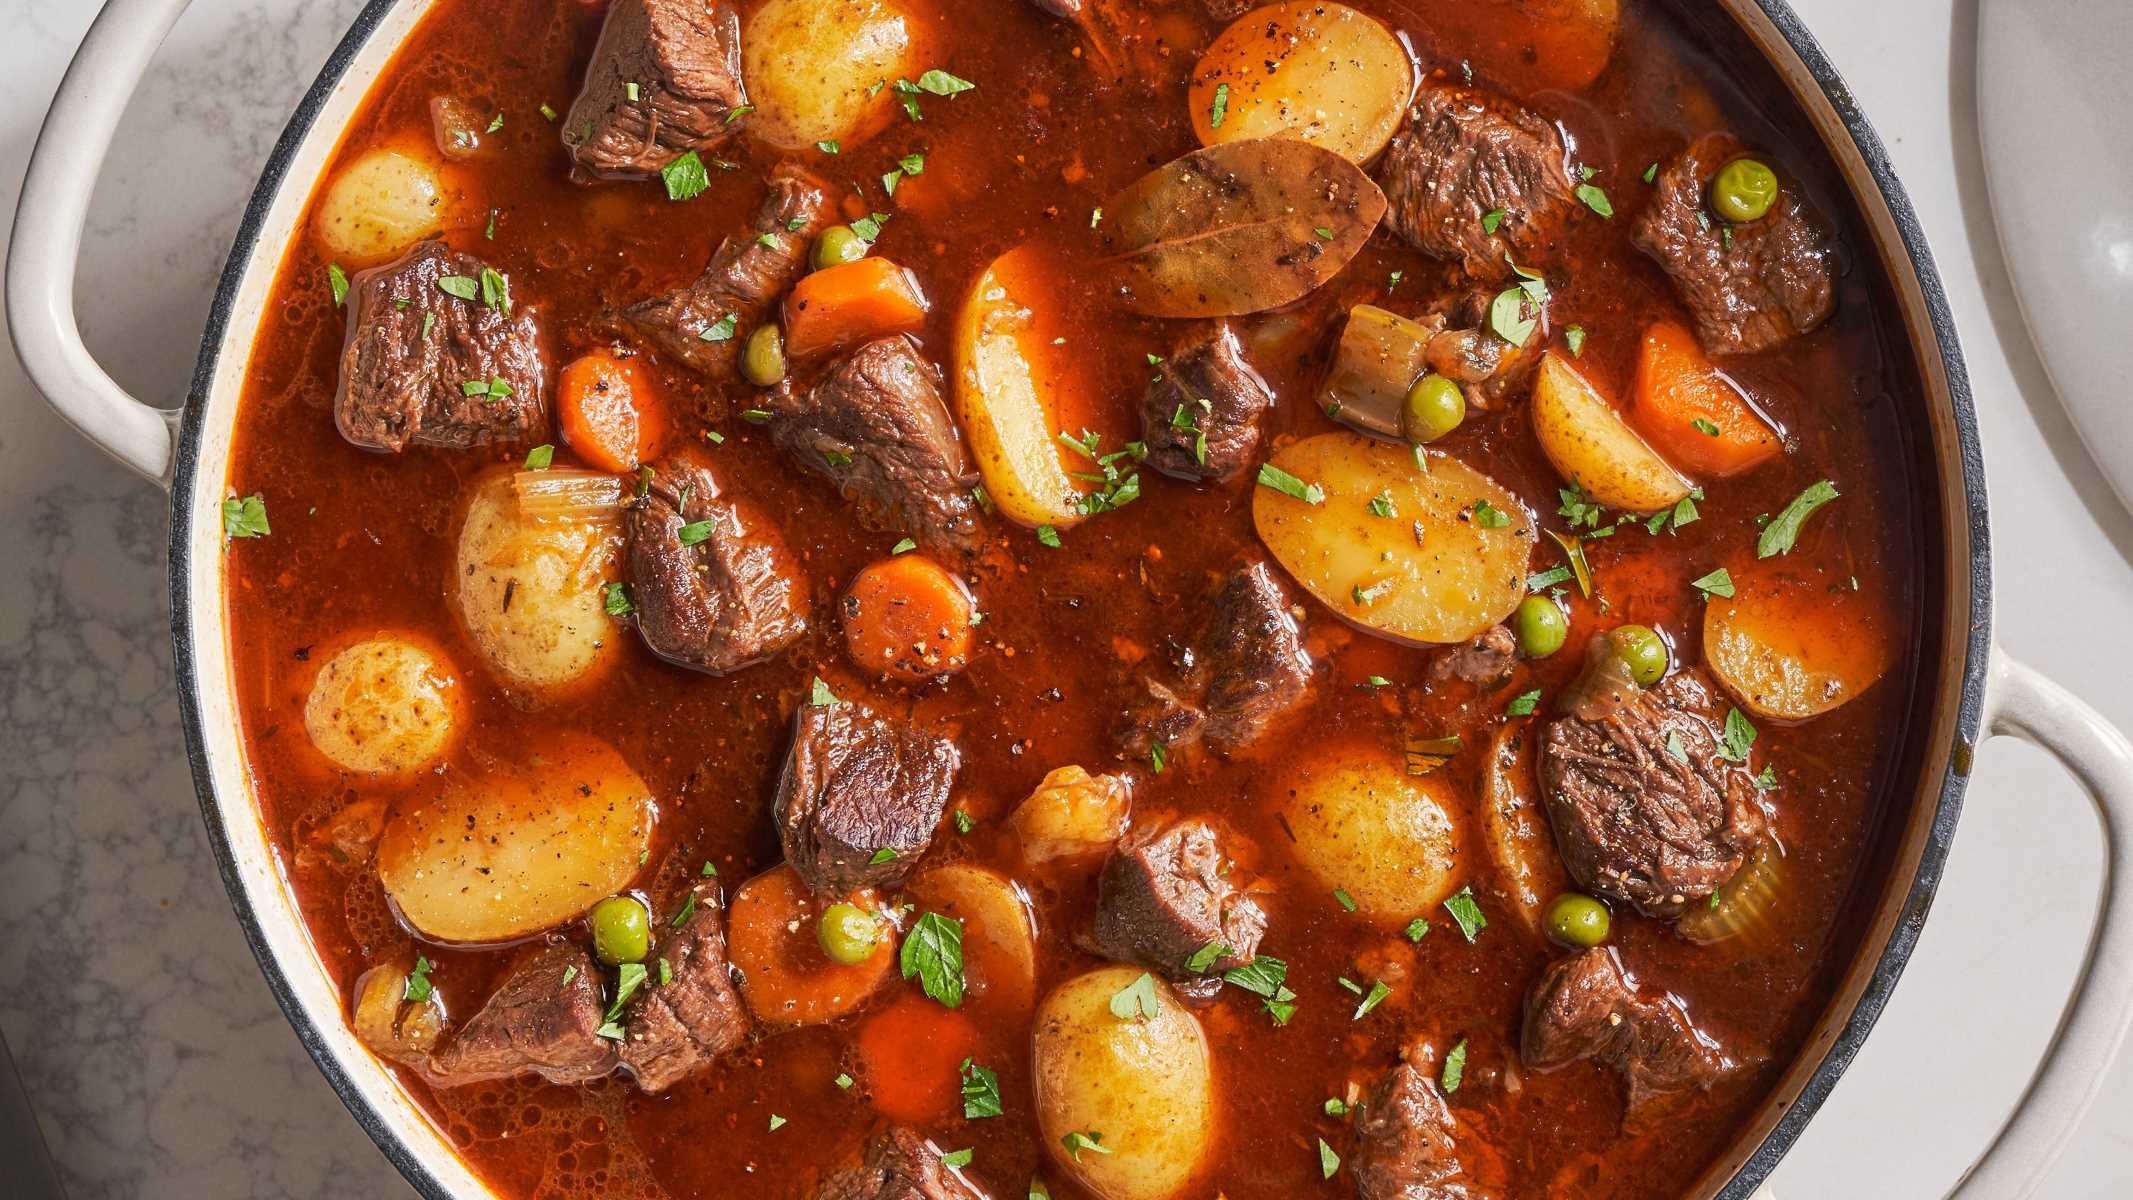 How To Make Stew Meat Tender